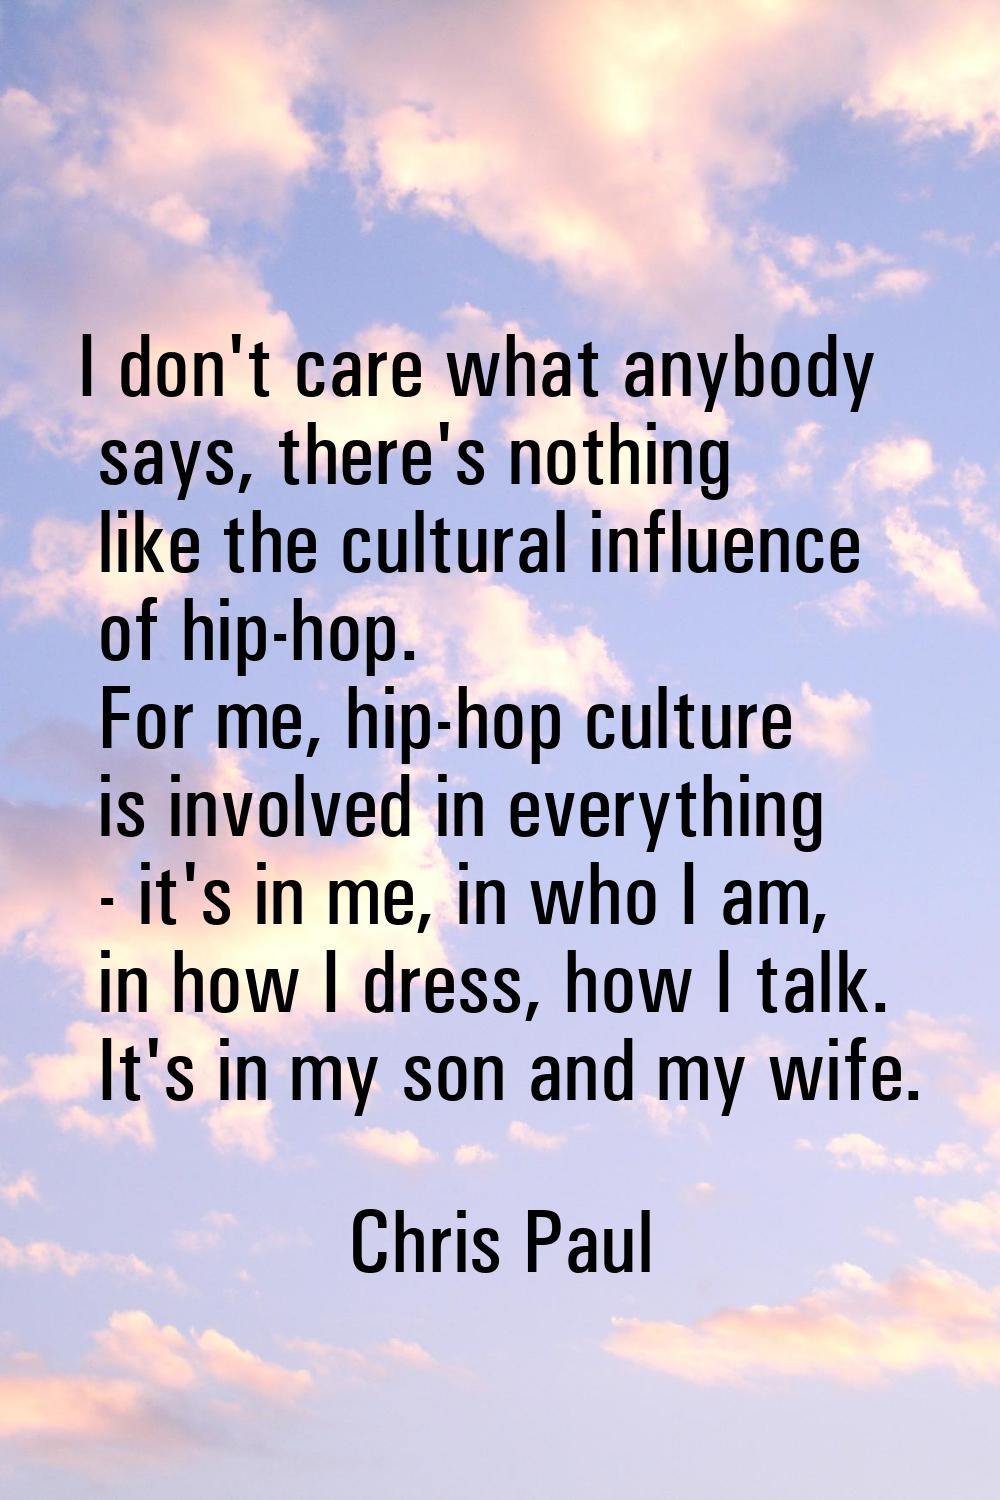 I don't care what anybody says, there's nothing like the cultural influence of hip-hop. For me, hip